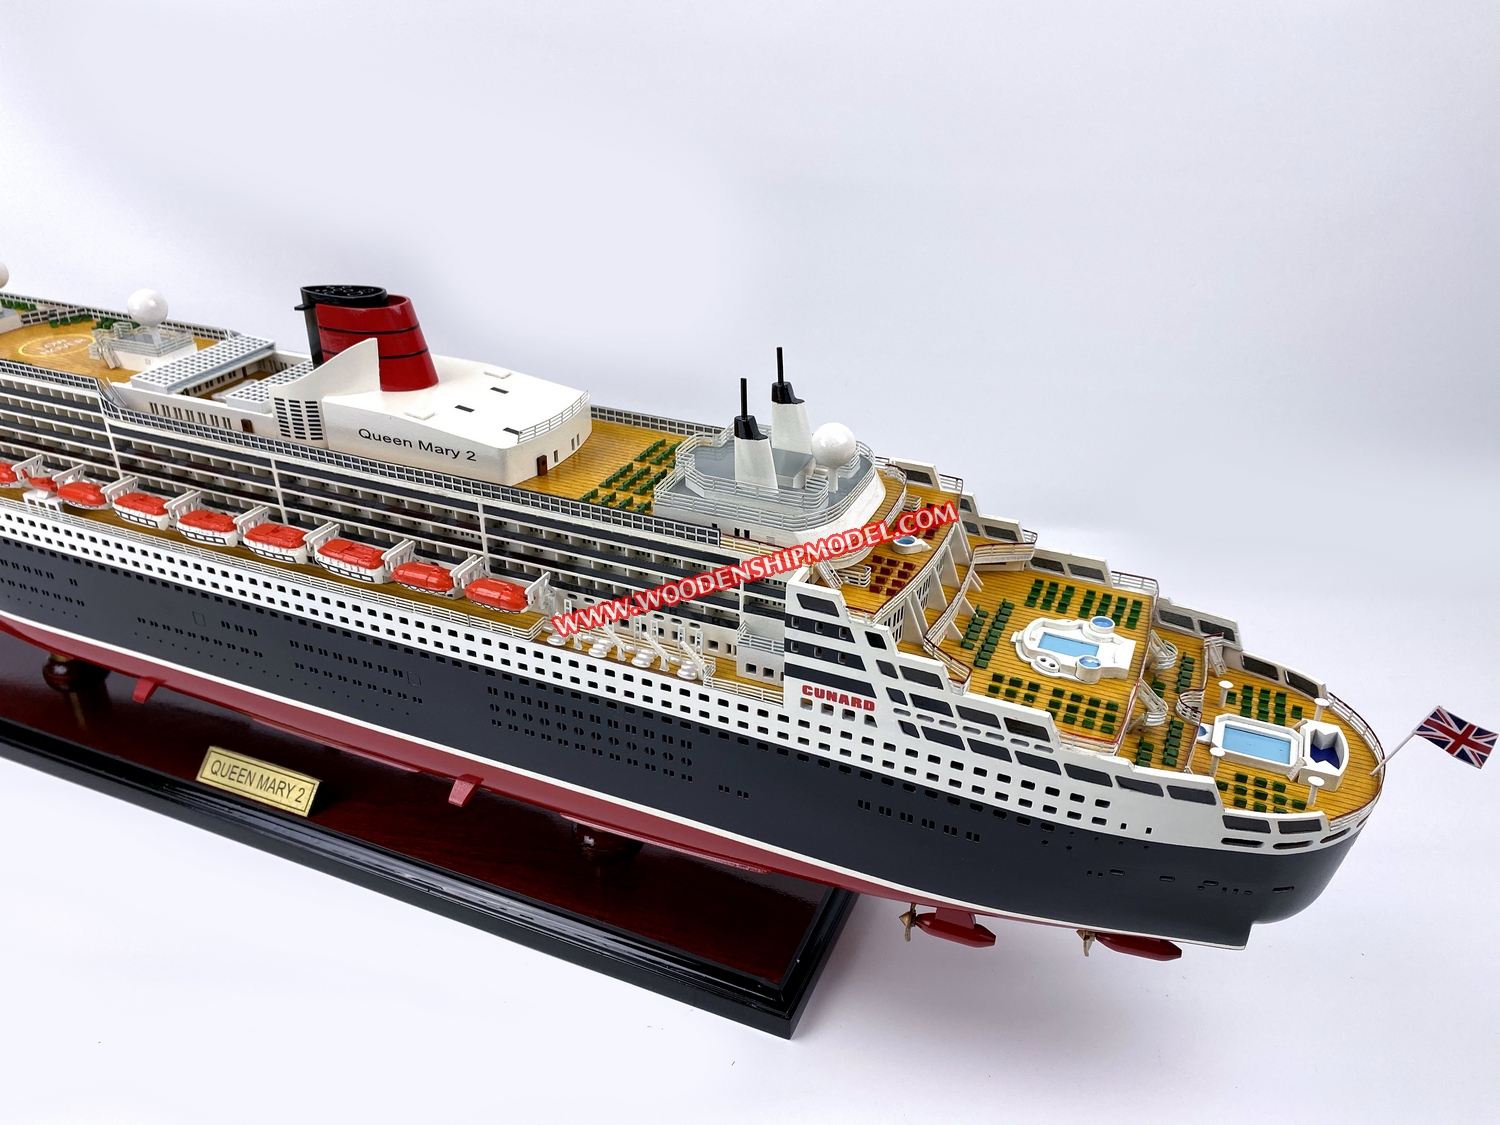 MODEL QUEEN MARY 2 FROM TOP STERN VIEW